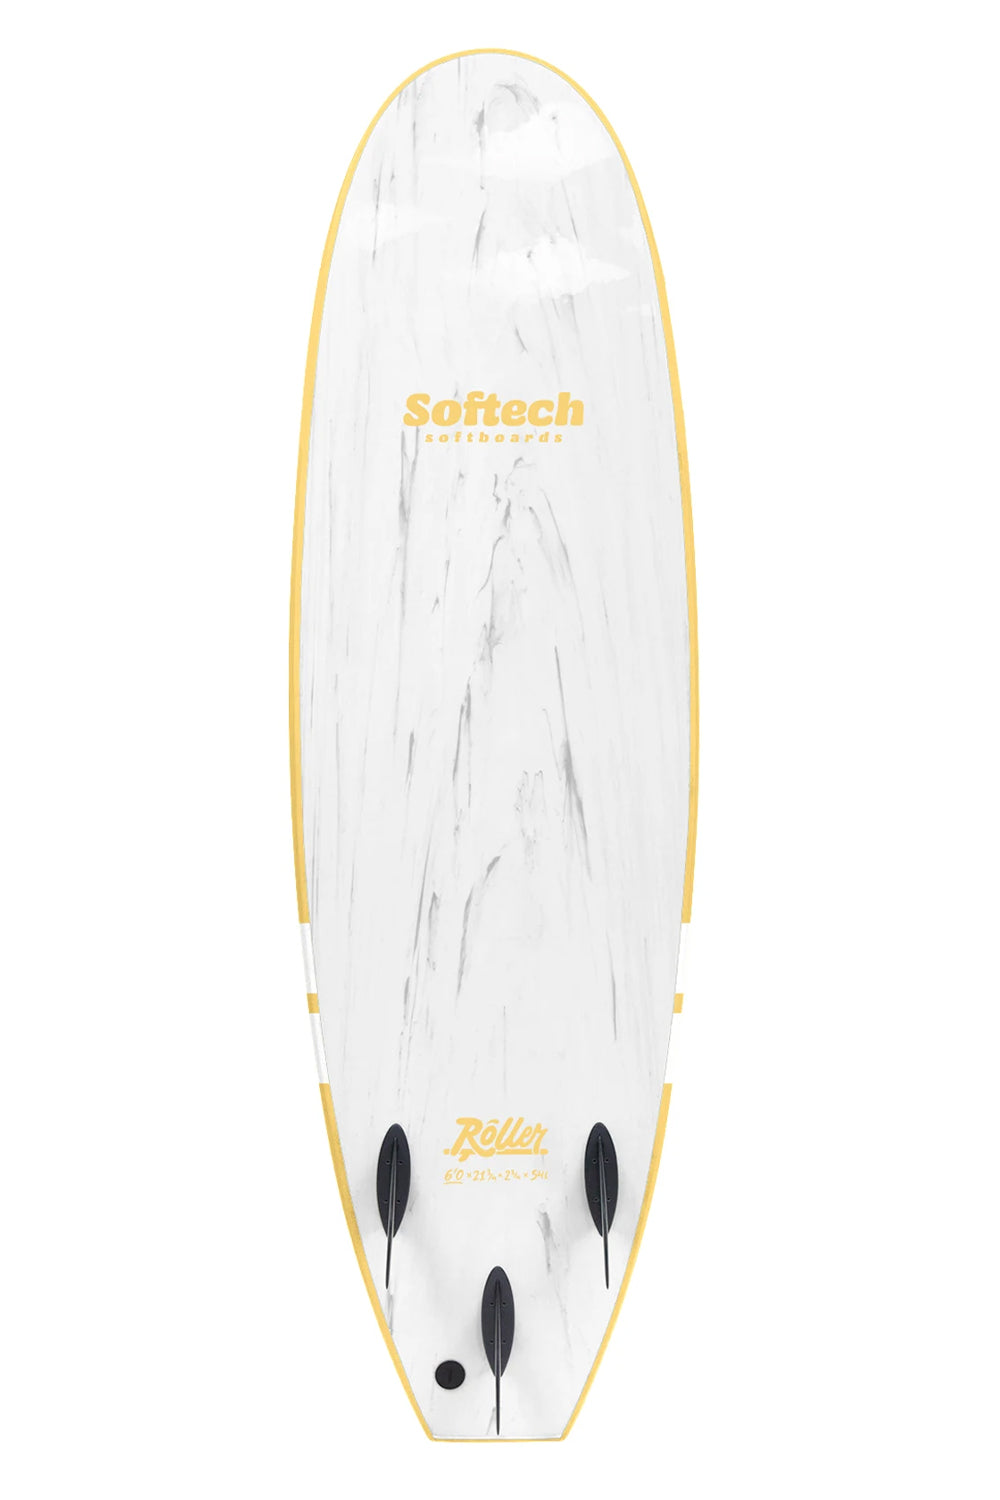 7'0 Softech Roller 2022 Softboard - Comes with fins